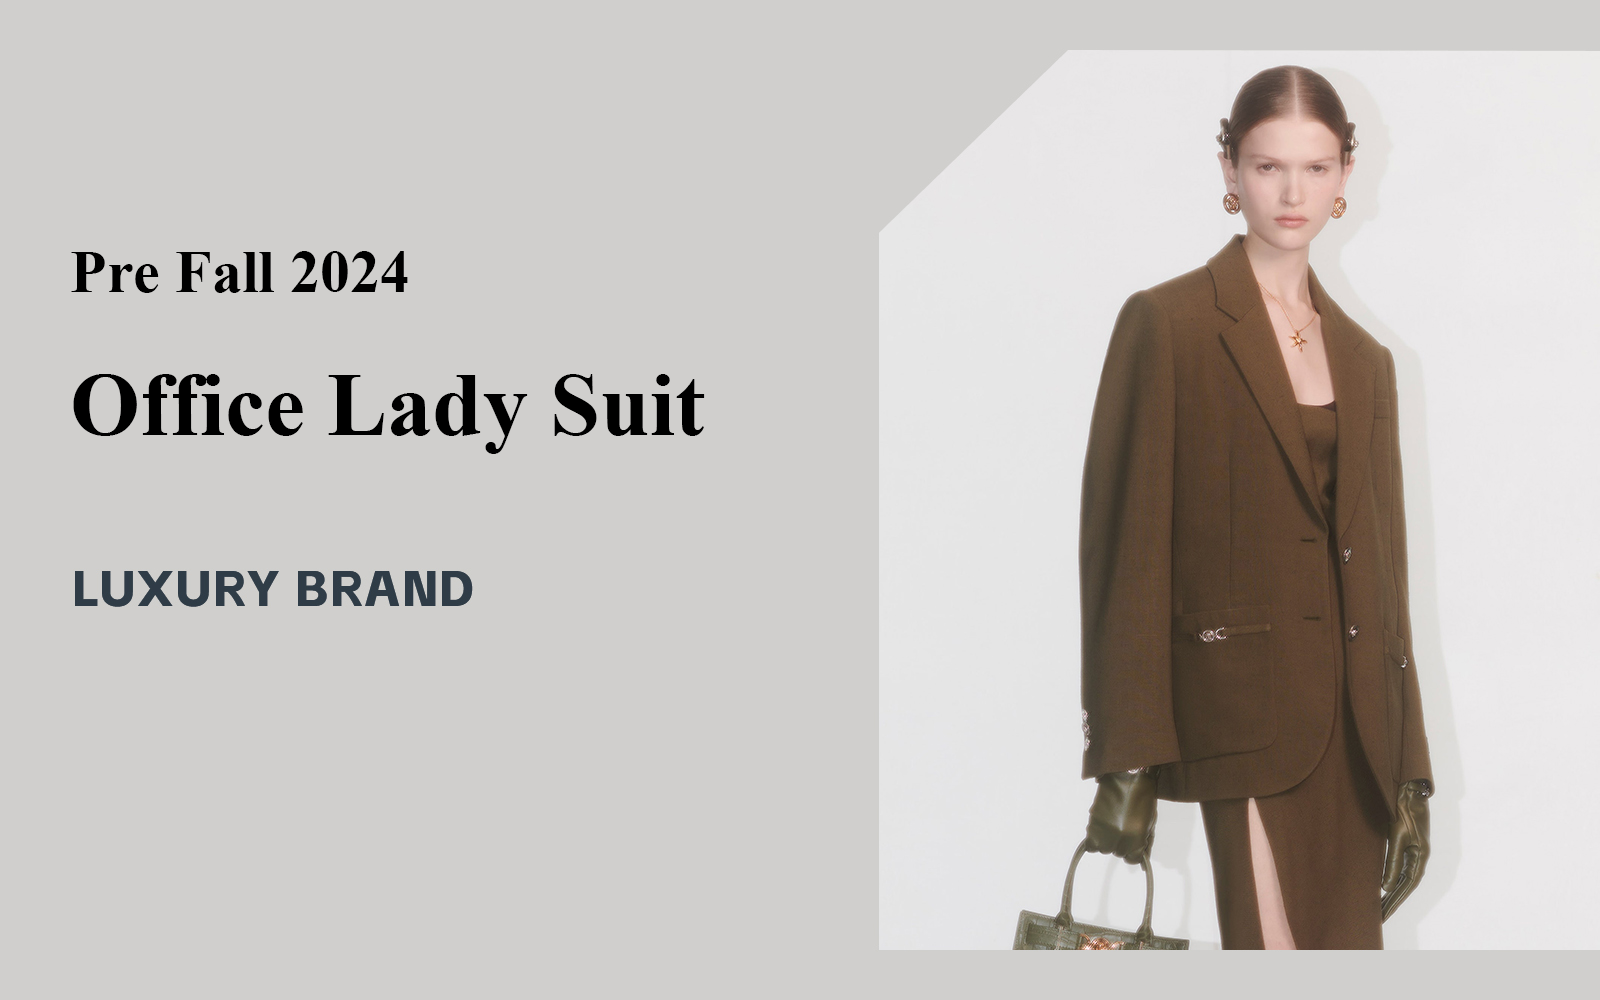 Office Lady -- The Analysis of Luxury Suit Brand